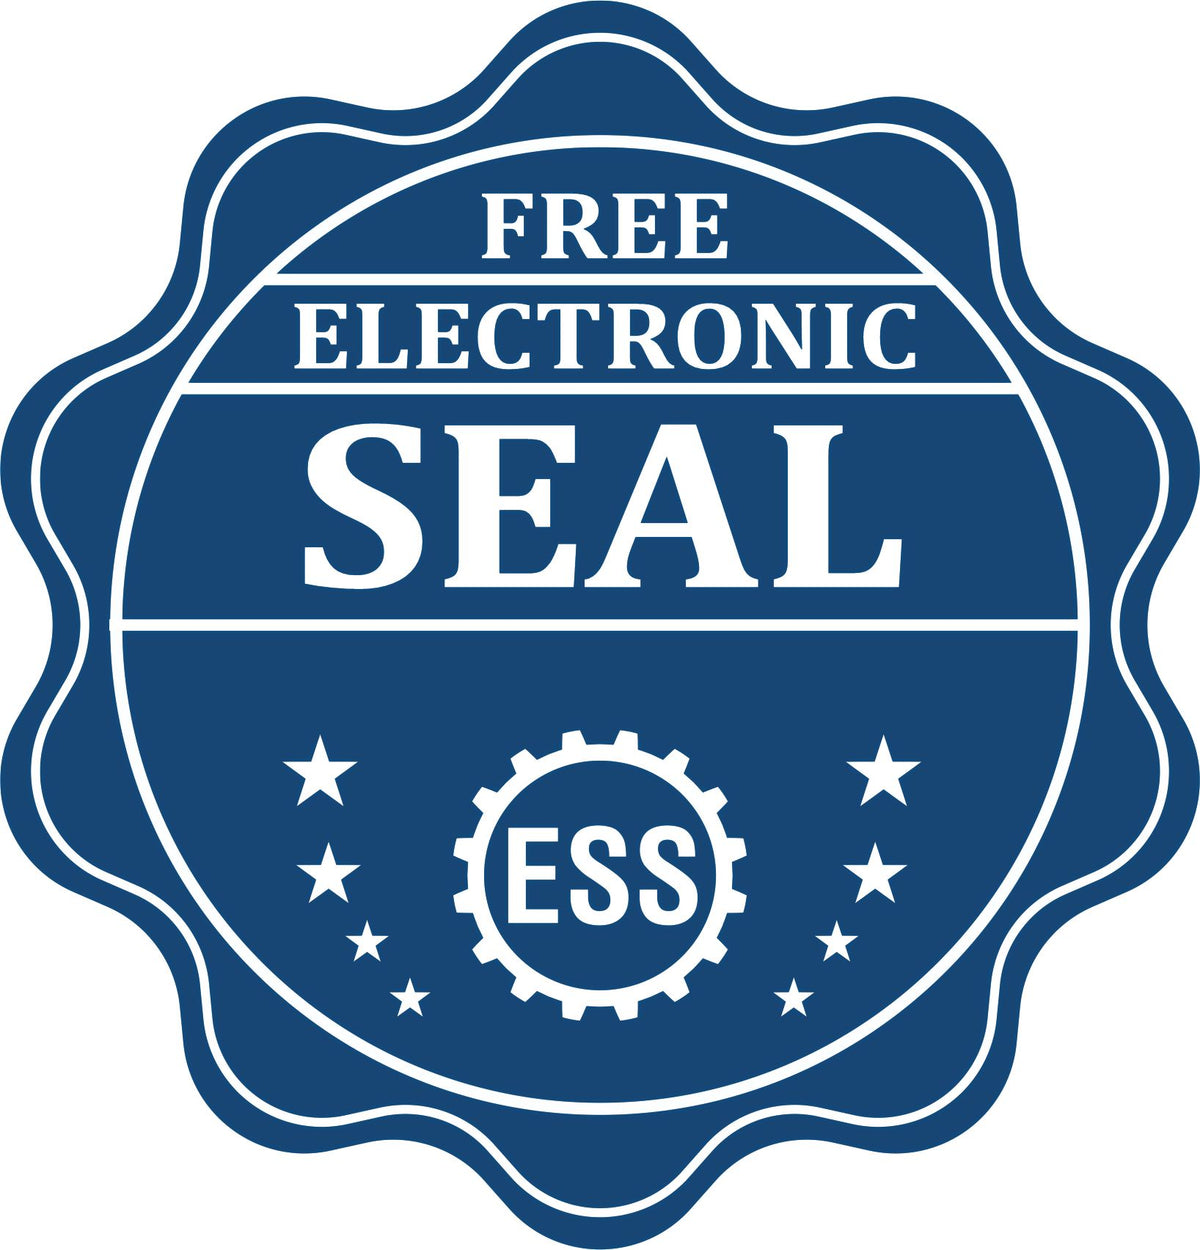 A badge showing a free electronic seal for the Hybrid Missouri Architect Seal with stars and the ESS gear on the emblem.